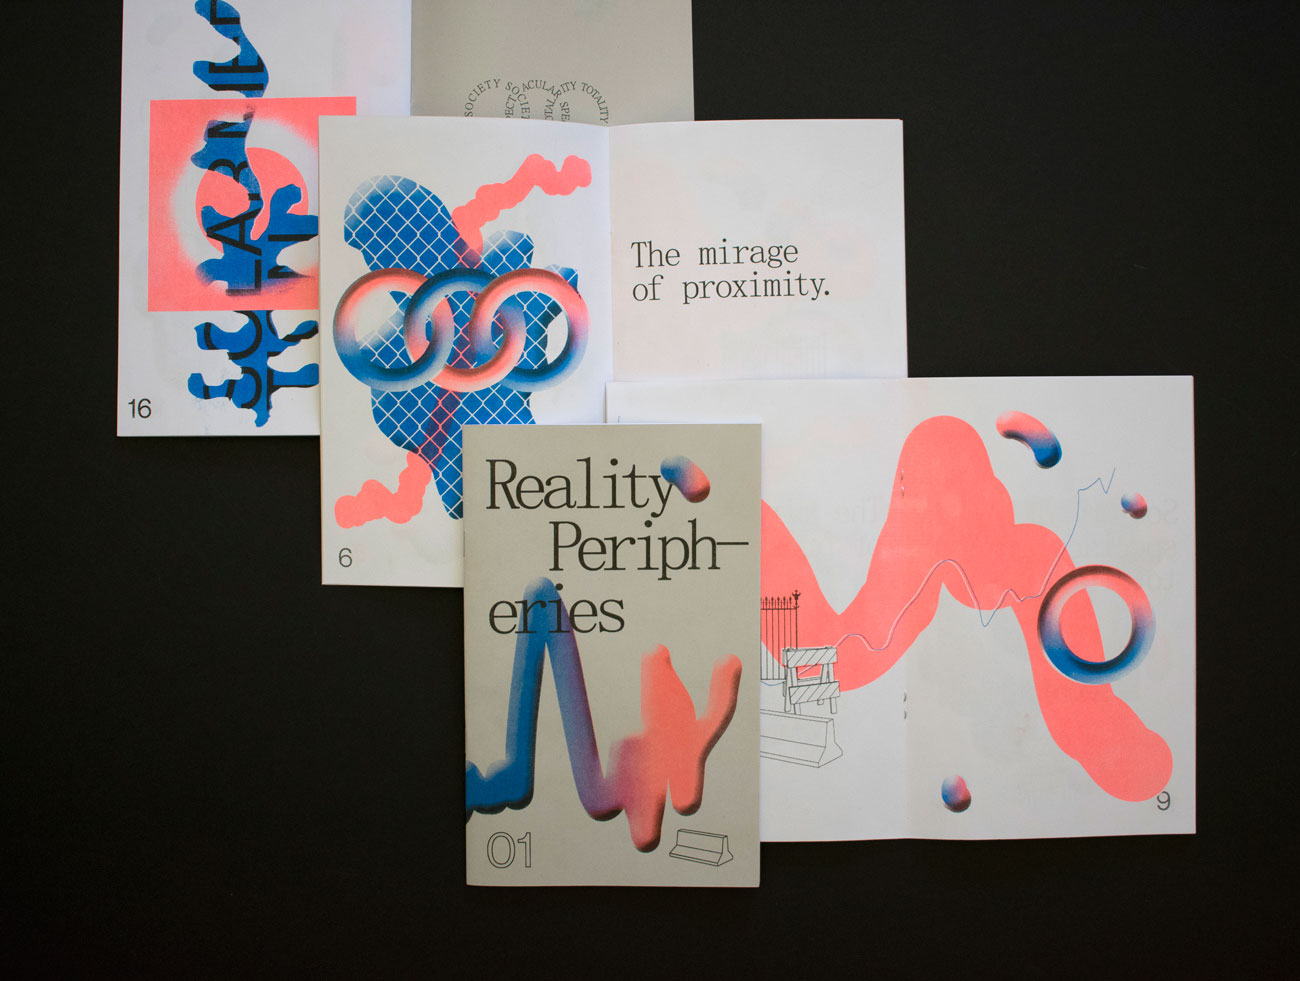 Reality Peripheries risograph publication by Drew Sisk, VCU MFA